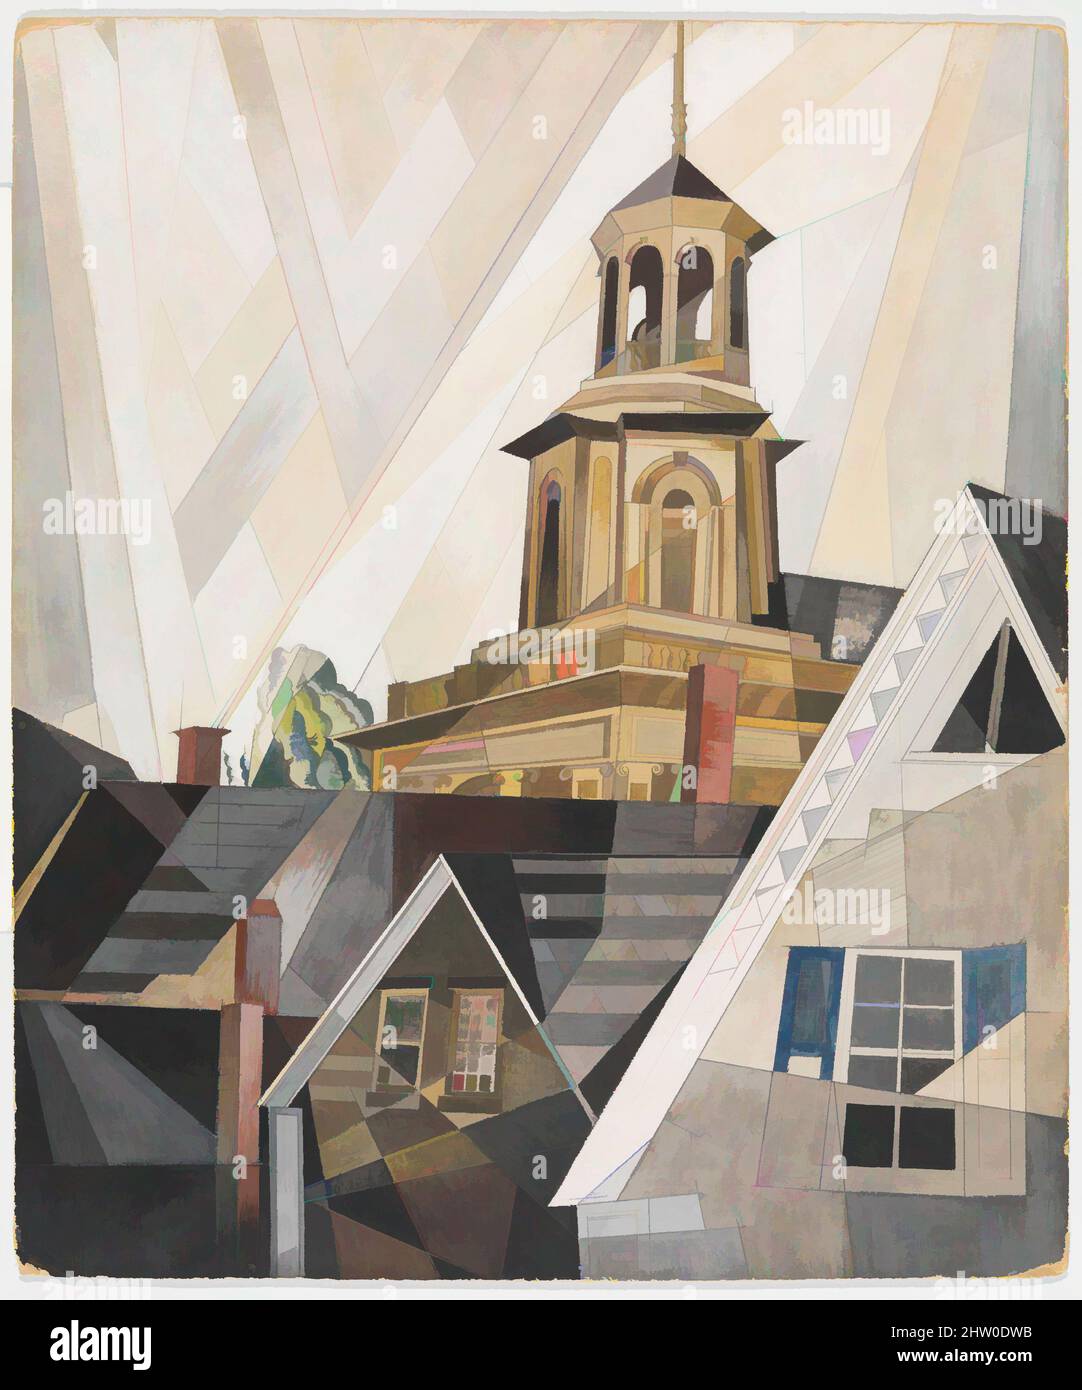 Art inspired by After Sir Christopher Wren, 1920, Watercolor, gouache, and graphite on cardboard, 24 x 20 in. (61 x 50.8 cm), Drawings, Charles Demuth (American, Lancaster, Pennsylvania 1883–1935 Lancaster, Pennsylvania), Scofield Thayer, the donor of this work, was not only an avid, Classic works modernized by Artotop with a splash of modernity. Shapes, color and value, eye-catching visual impact on art. Emotions through freedom of artworks in a contemporary way. A timeless message pursuing a wildly creative new direction. Artists turning to the digital medium and creating the Artotop NFT Stock Photo